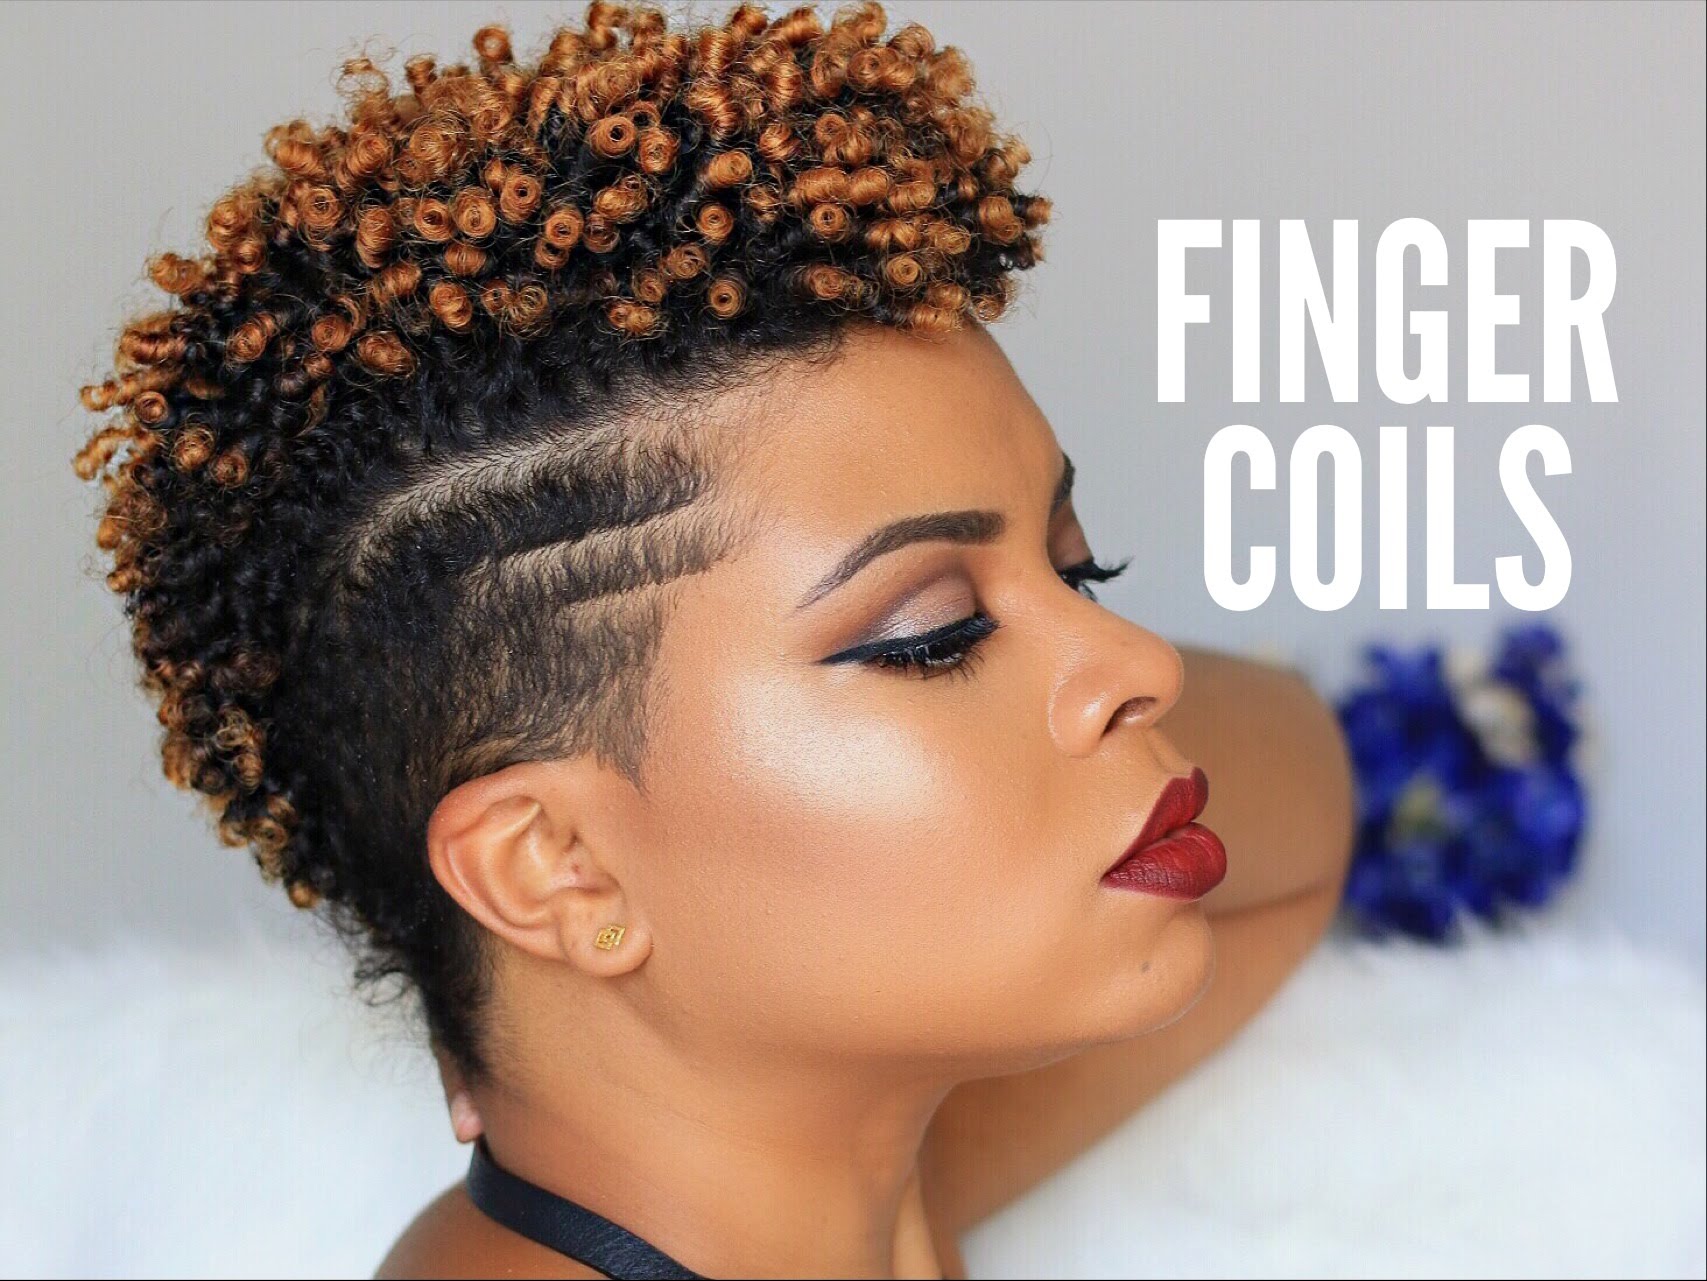 What Are Finger Coils? How To Get The Perfect Finger Coils?